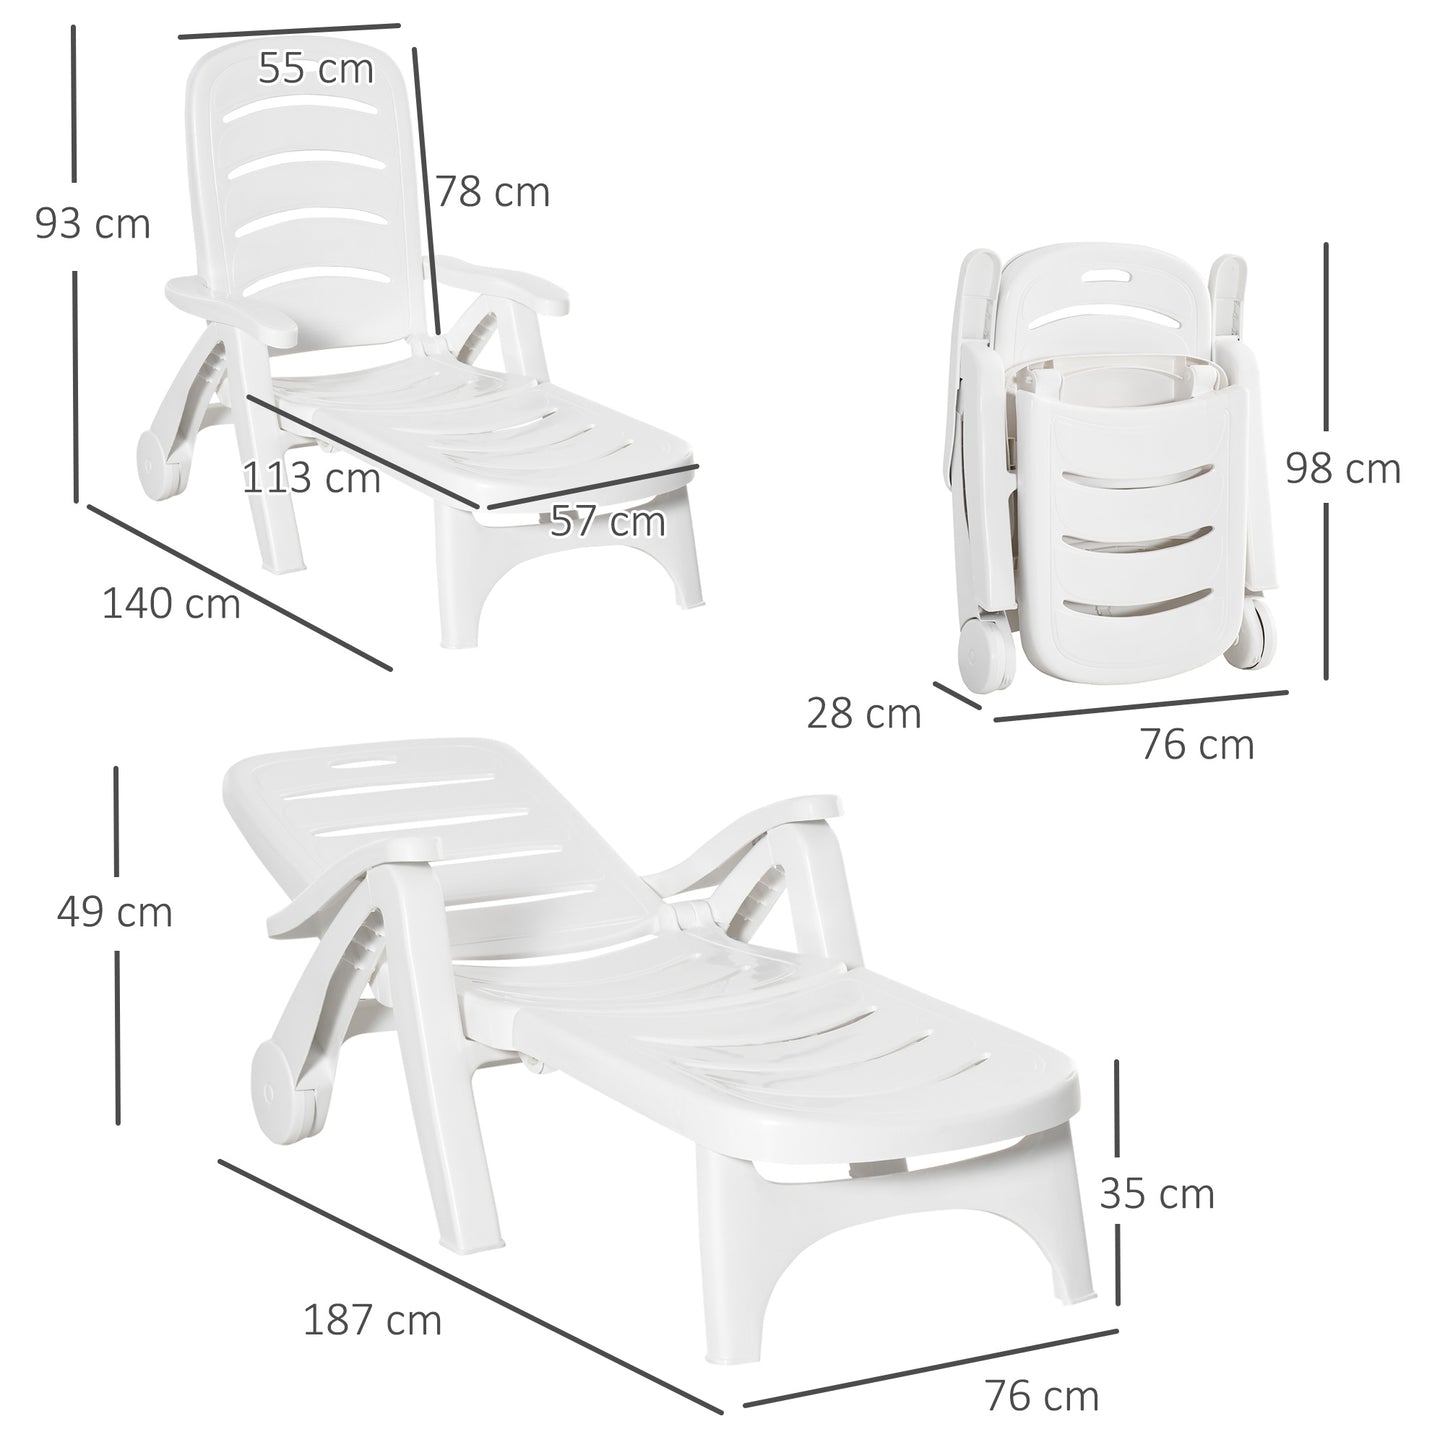 Outsunny 2PCs Outdoor Folding Sun Lounger Recliner on Wheels w/ 5-Position Backrest, White